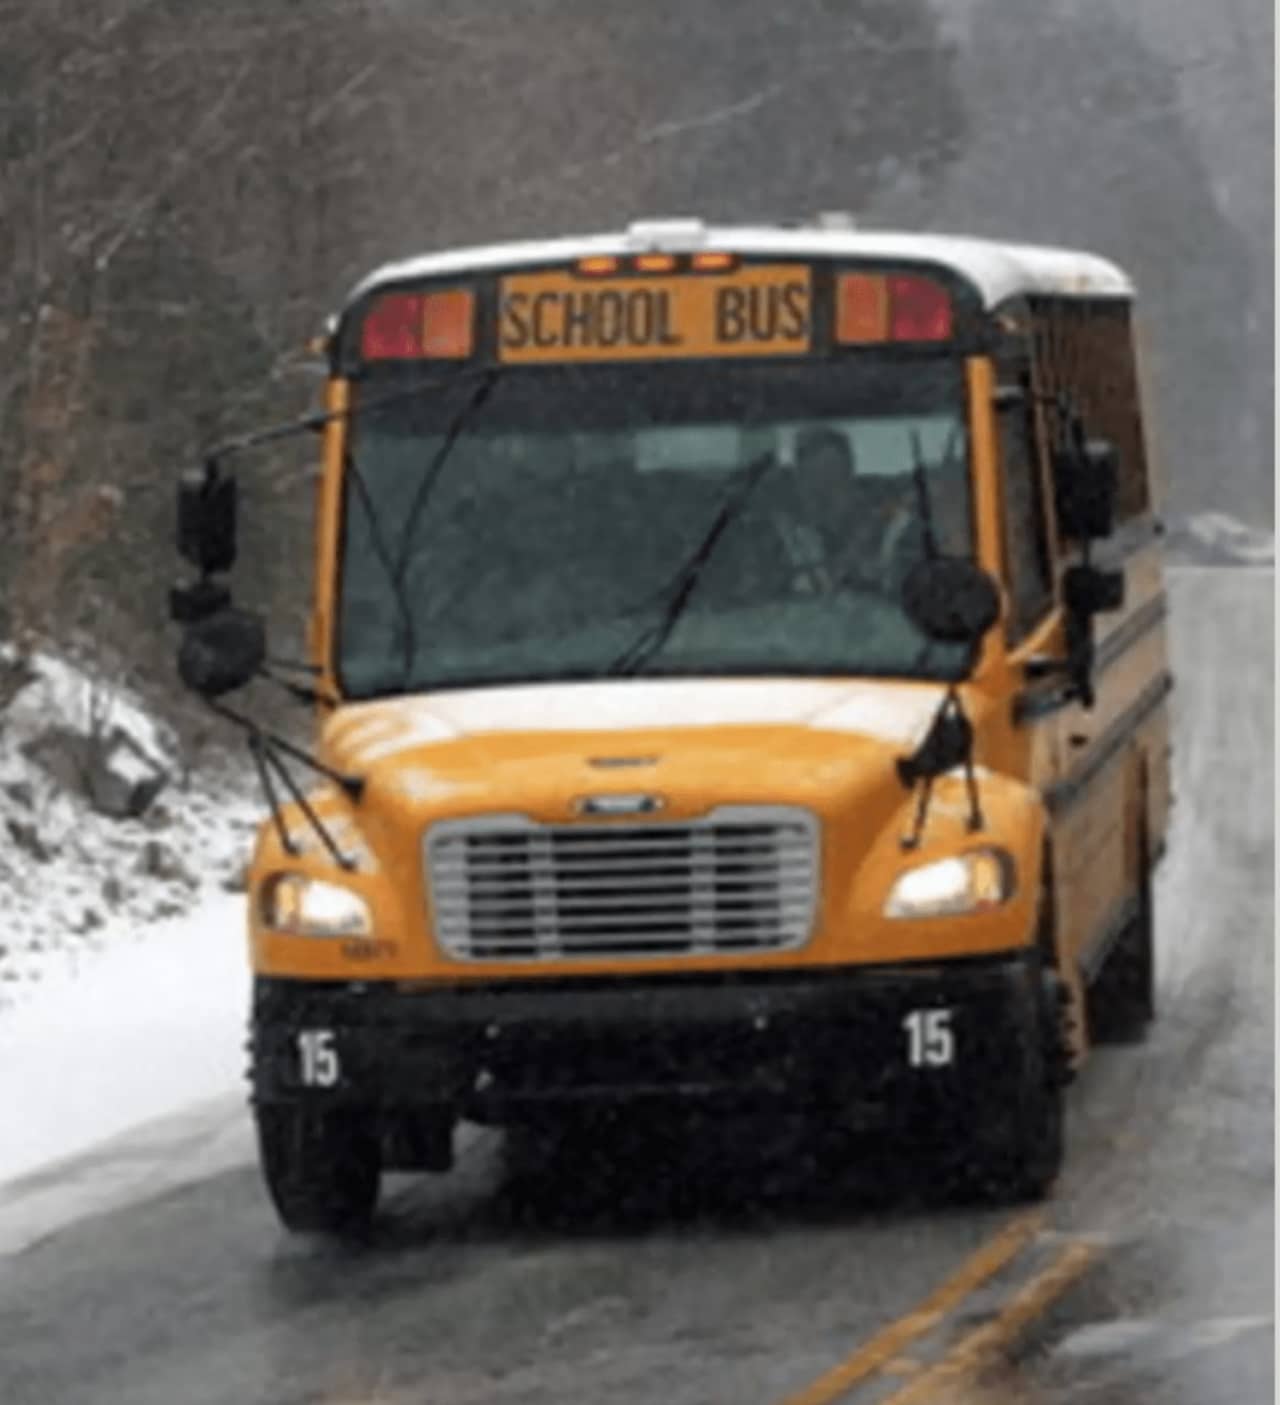 Schools in the area have announced delayed starts for Friday as a result of icy conditions following Thursday's winter storm.